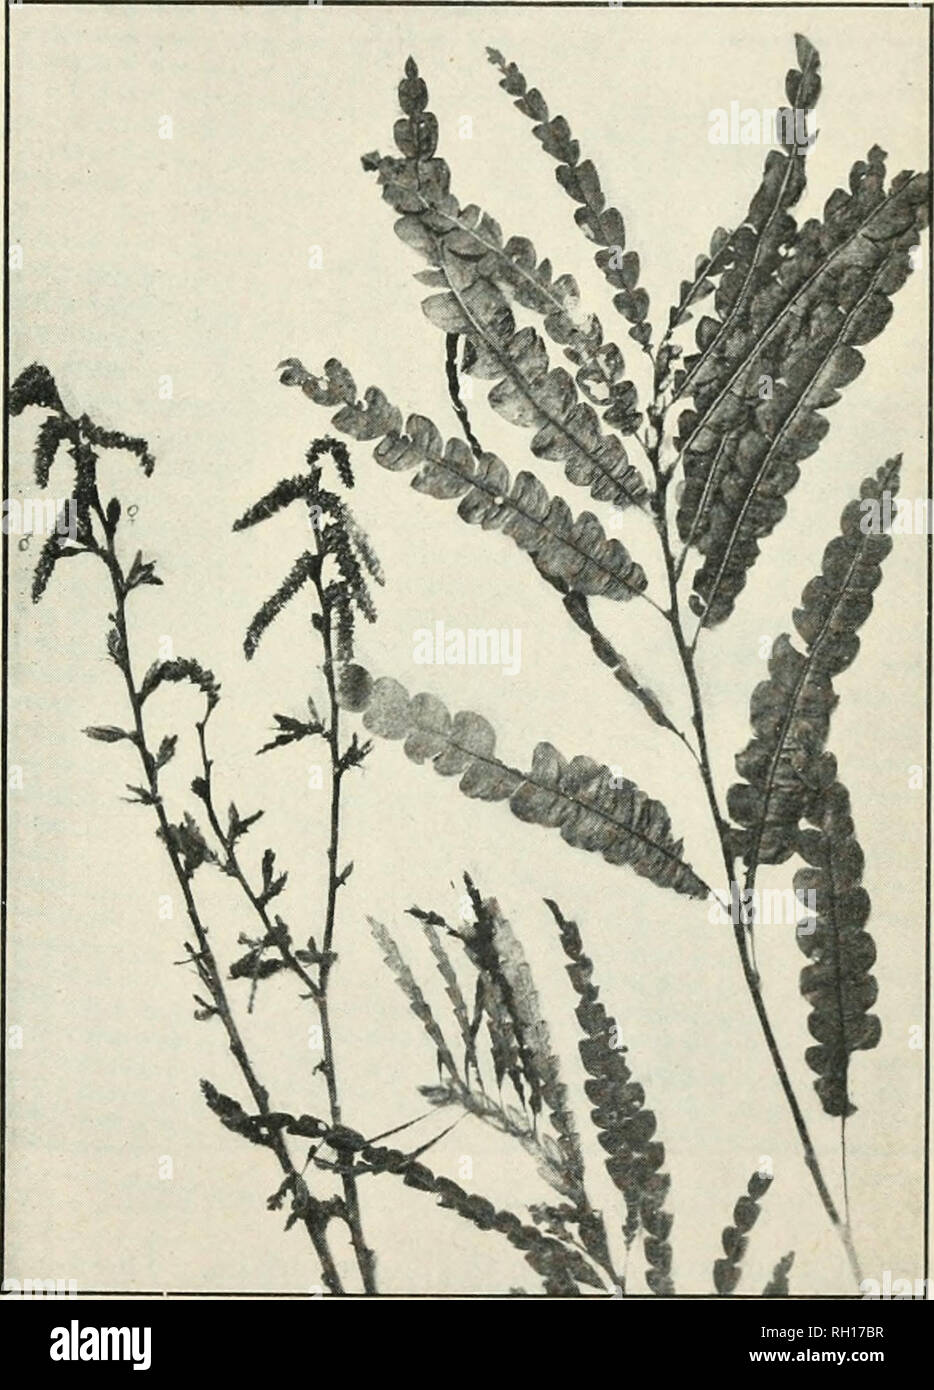 . Bulletin. Agriculture. PLANTS FURNISHING MEDICINAL LEAVES AND HERBS, 9 SWEET FERN. Comptonia peregrina (L.) Coullor. Synonyms.—rComptonia asplenifolia Gaertn.; Myrira itsplenifoUa L.; Liquidambor asplenifolia L.; Liquidamhar peregrina L. Other common names.—Kern gale, fern bush, meadow fern, shrubby fern, Canada tivveet gale, spleenwort bush, sweet bush, sweet ferry. Habitat and range.—Sweet fern is usually found on hillsides, in dry soil, in Canada and the northeastern United States. It is indigenous. Description.—The fragrant odor and the resemblance of the leaves of this plant to those of Stock Photo